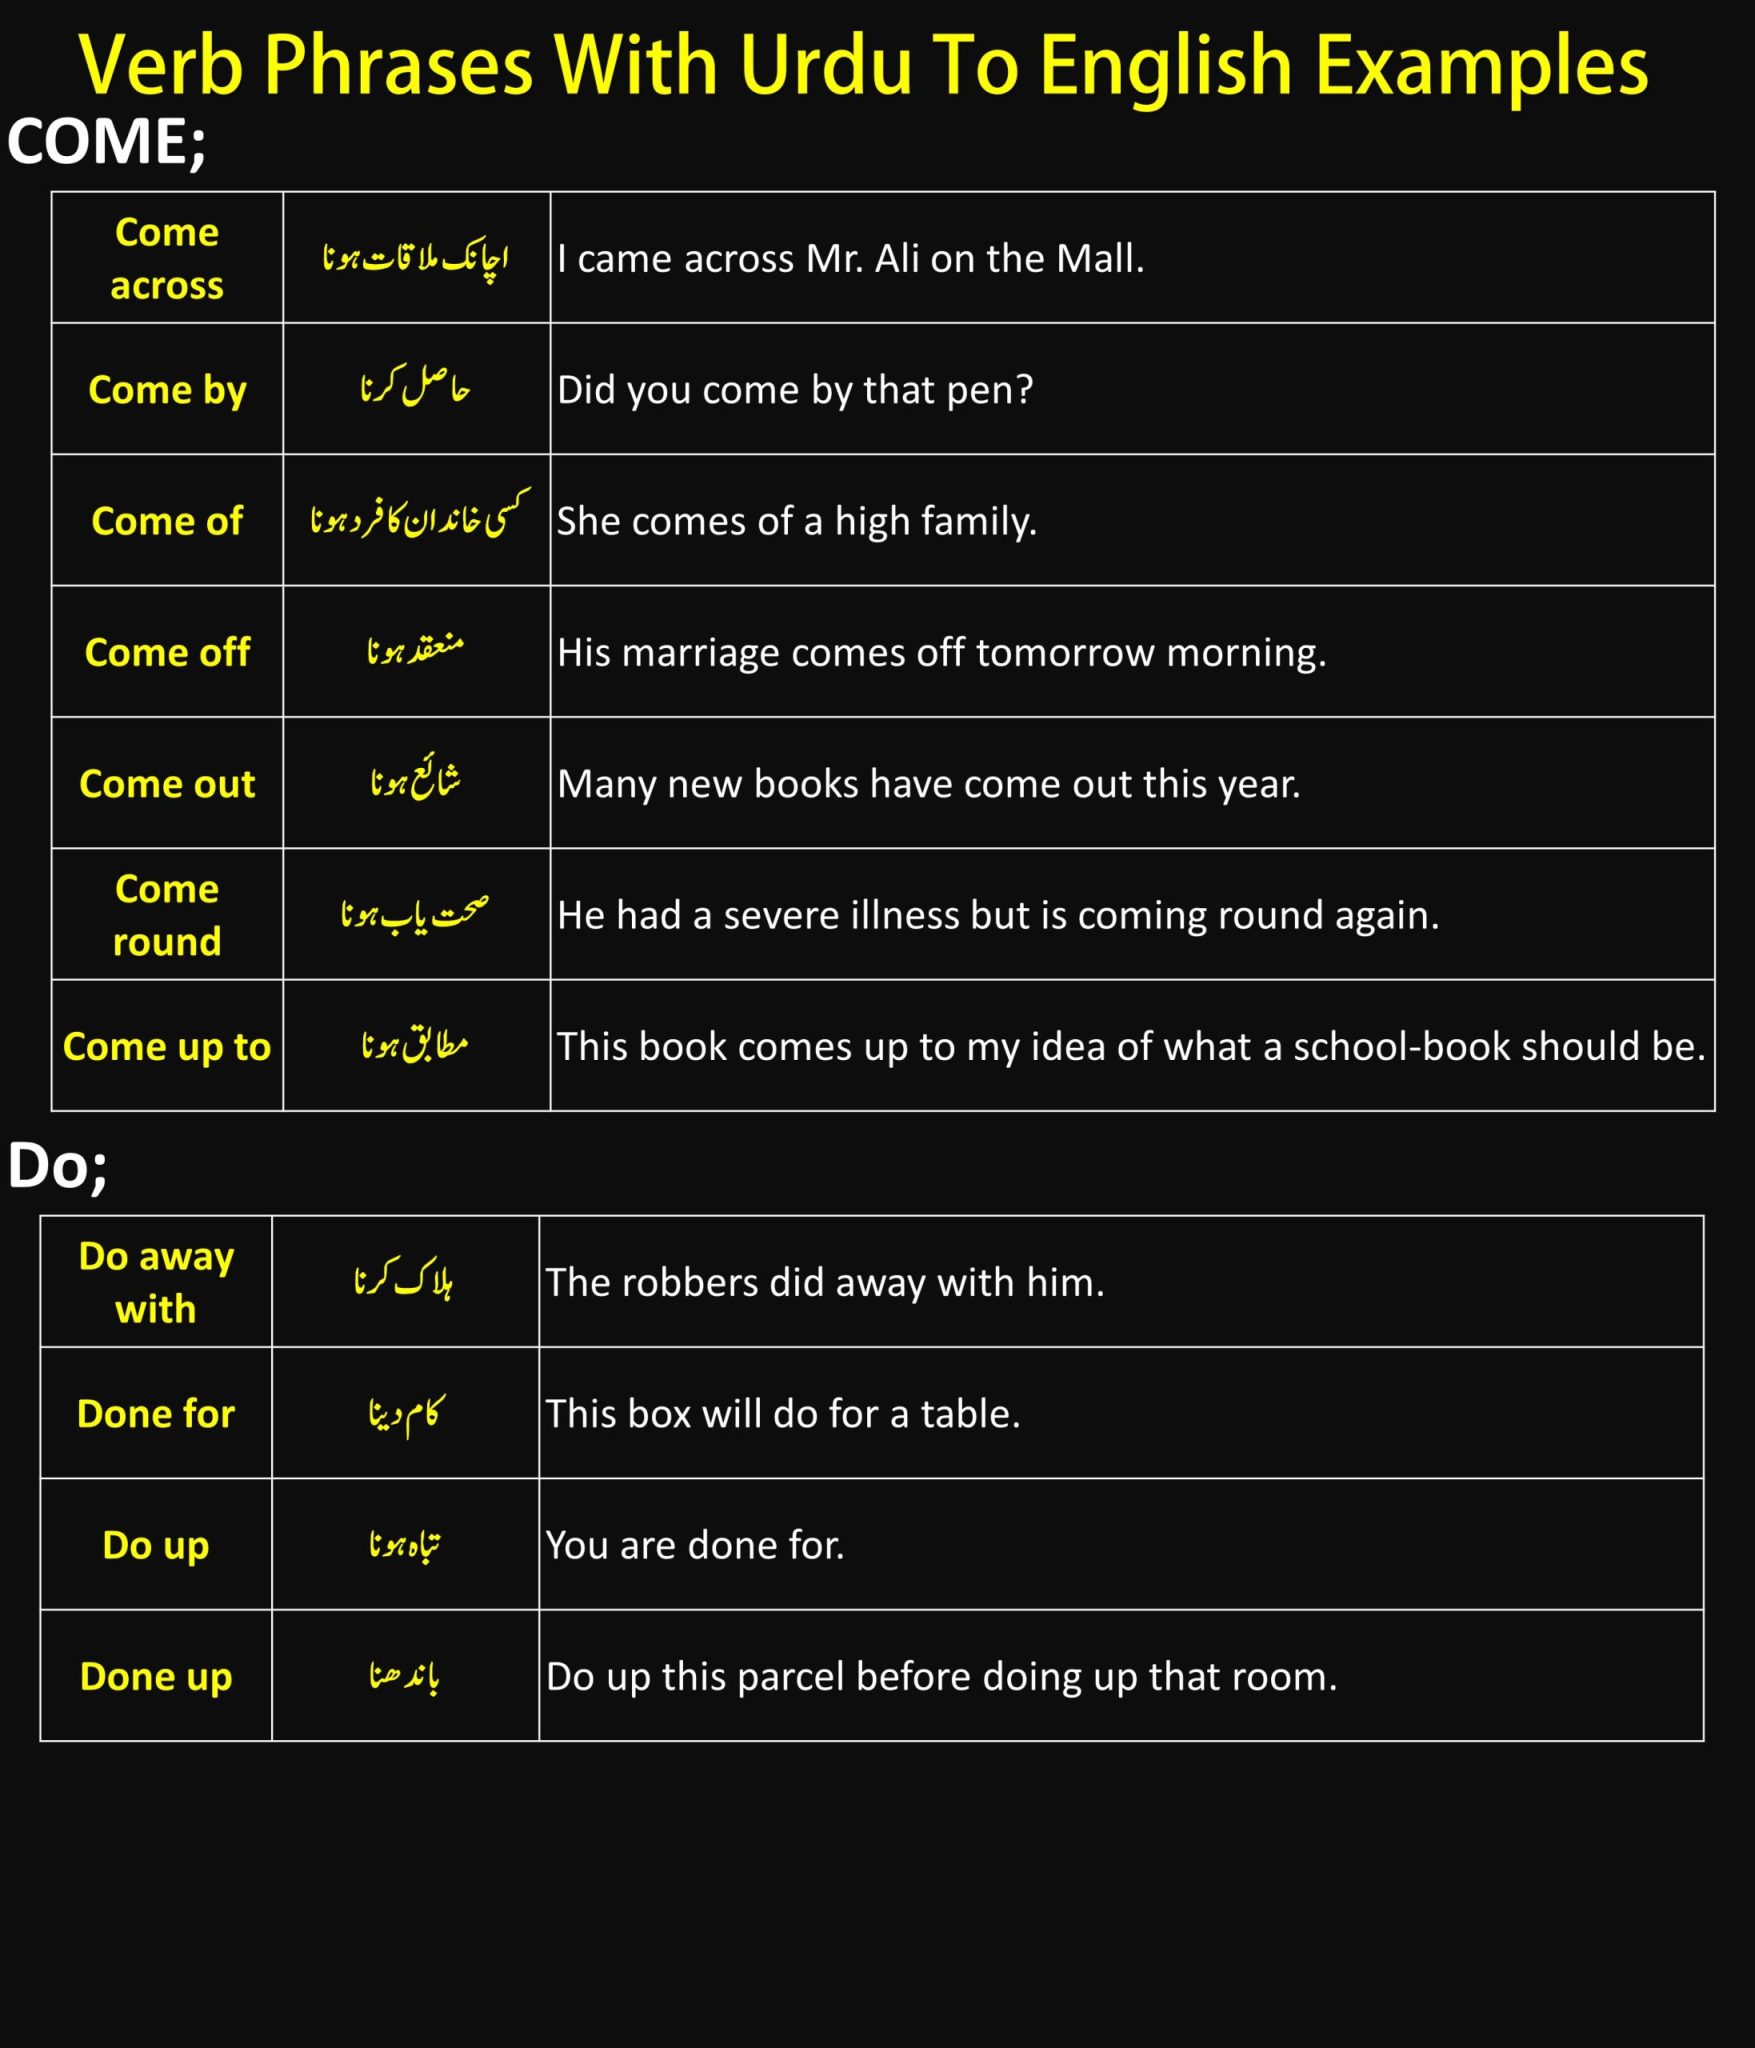 Verb Phrases With Urdu To English Examples